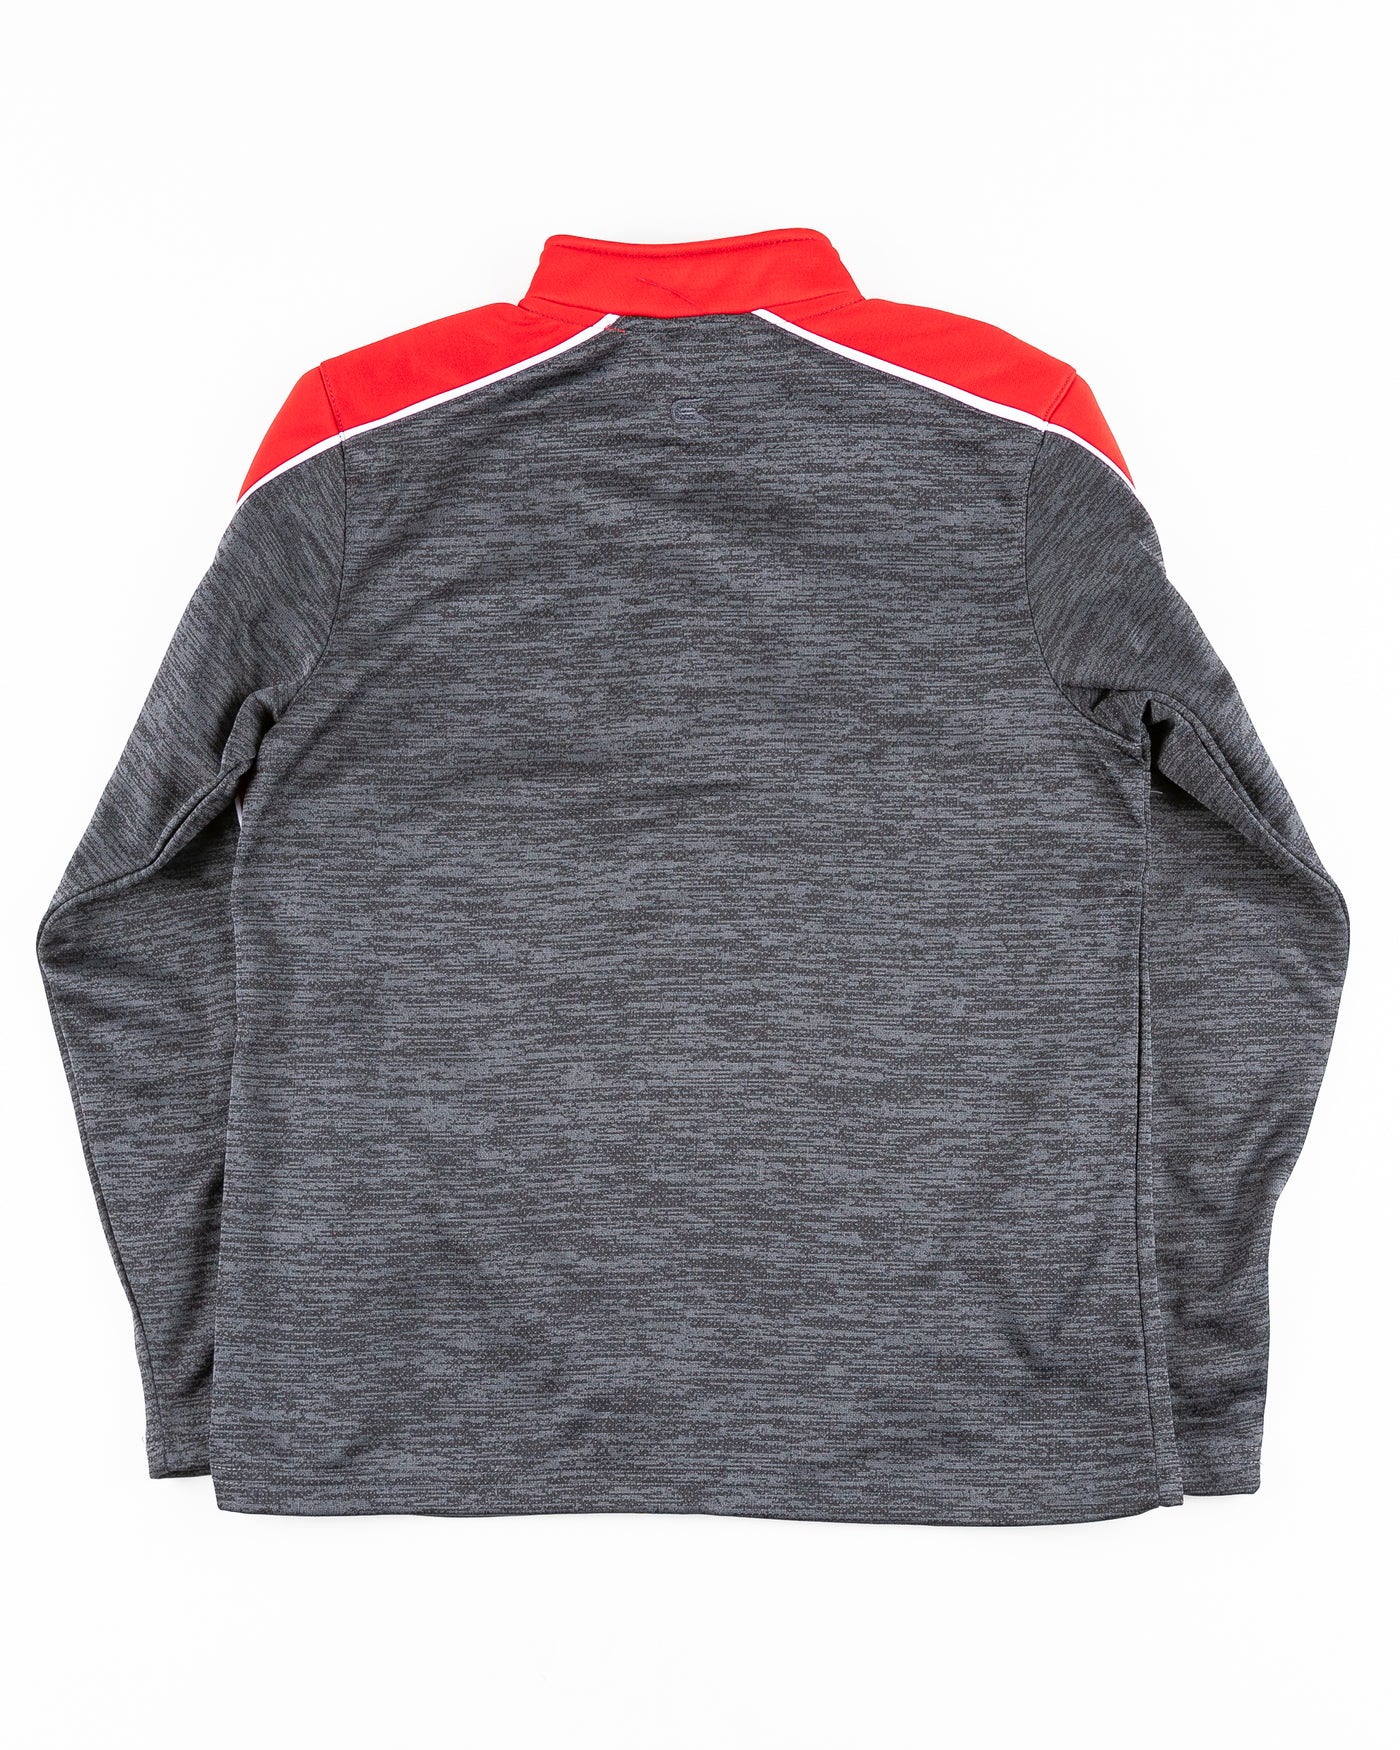 grey youth Rockford IceHogs quarter zip with red accents - back lay flat